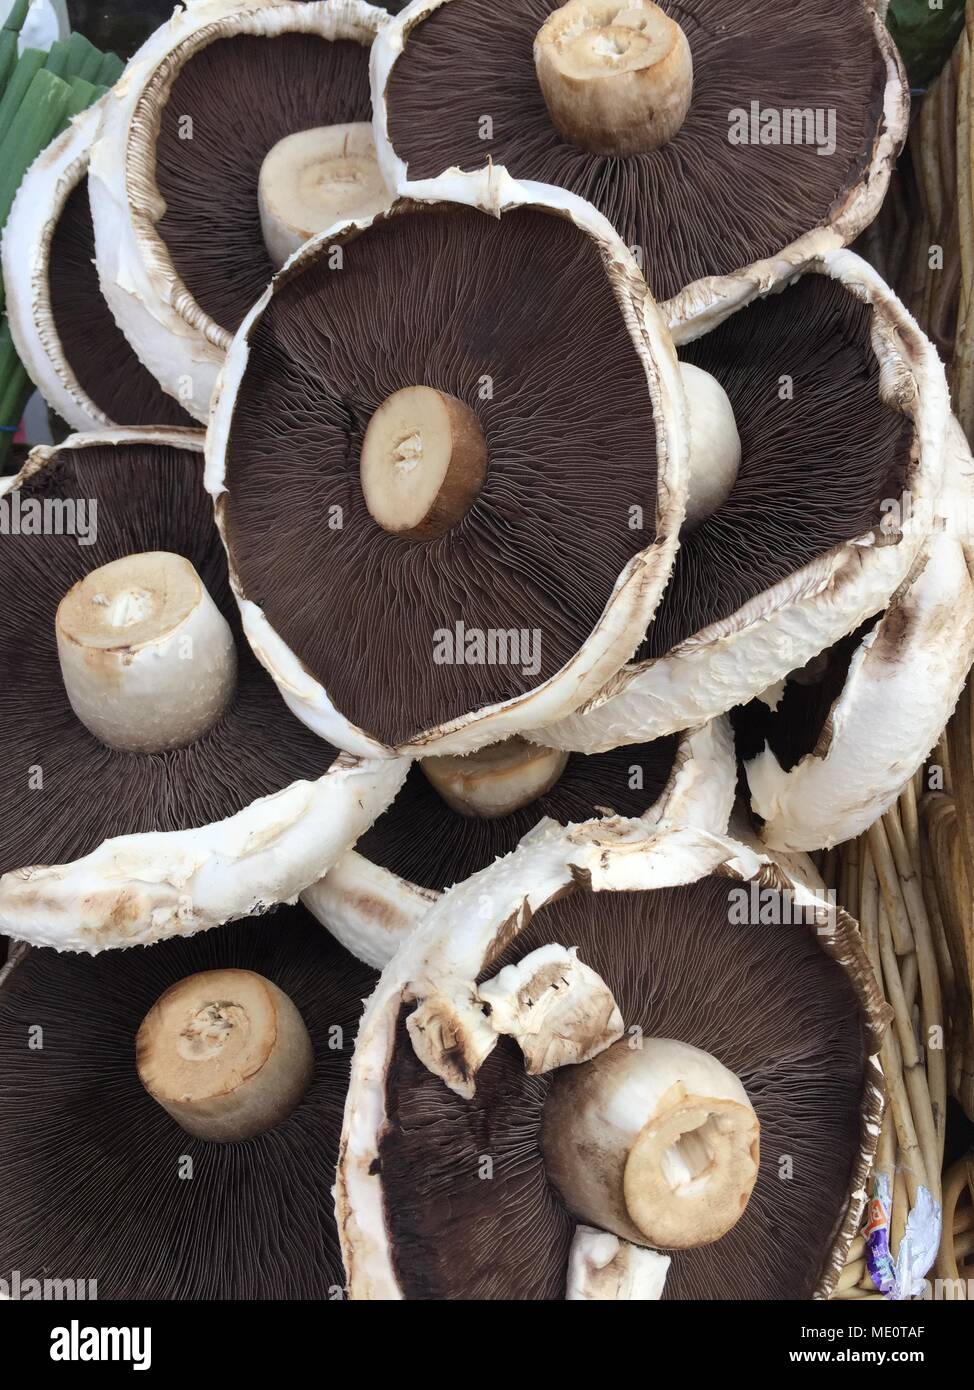 A basket packed full of Portobello mushrooms ina fruit and vegetable background image on an outdoor market stall Stock Photo